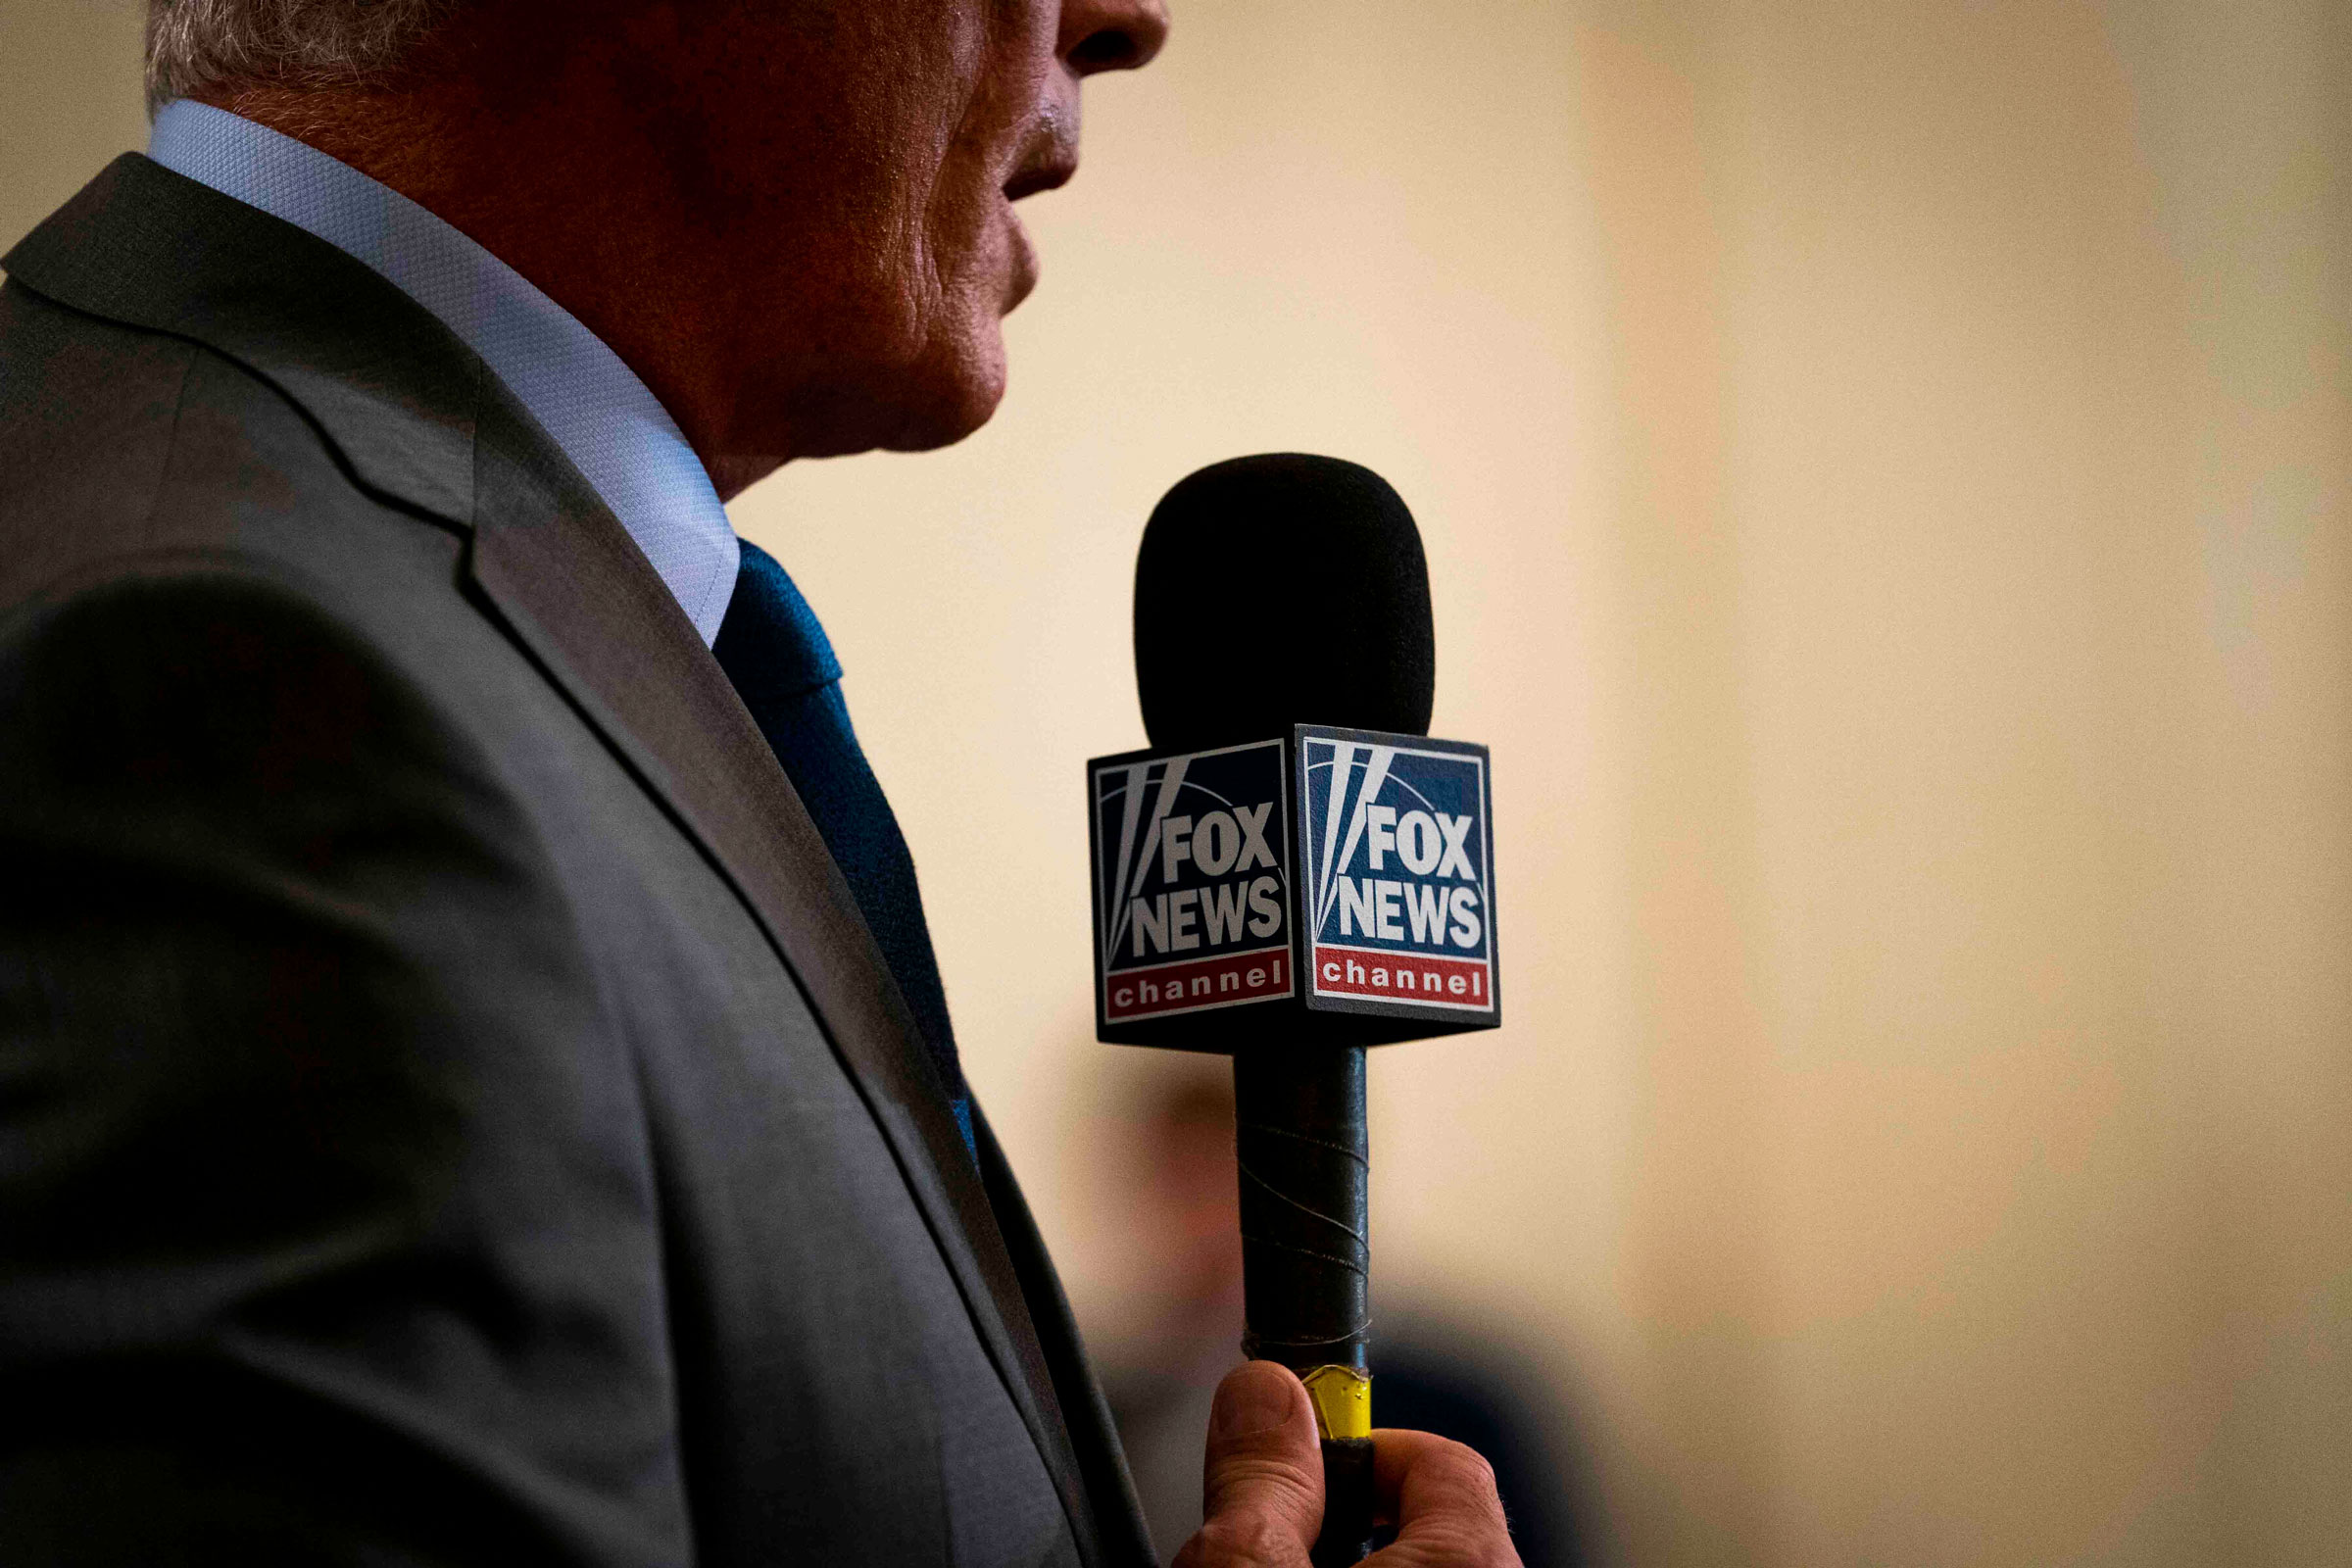 A Fox News reporter during coverage of a news conference at the White House